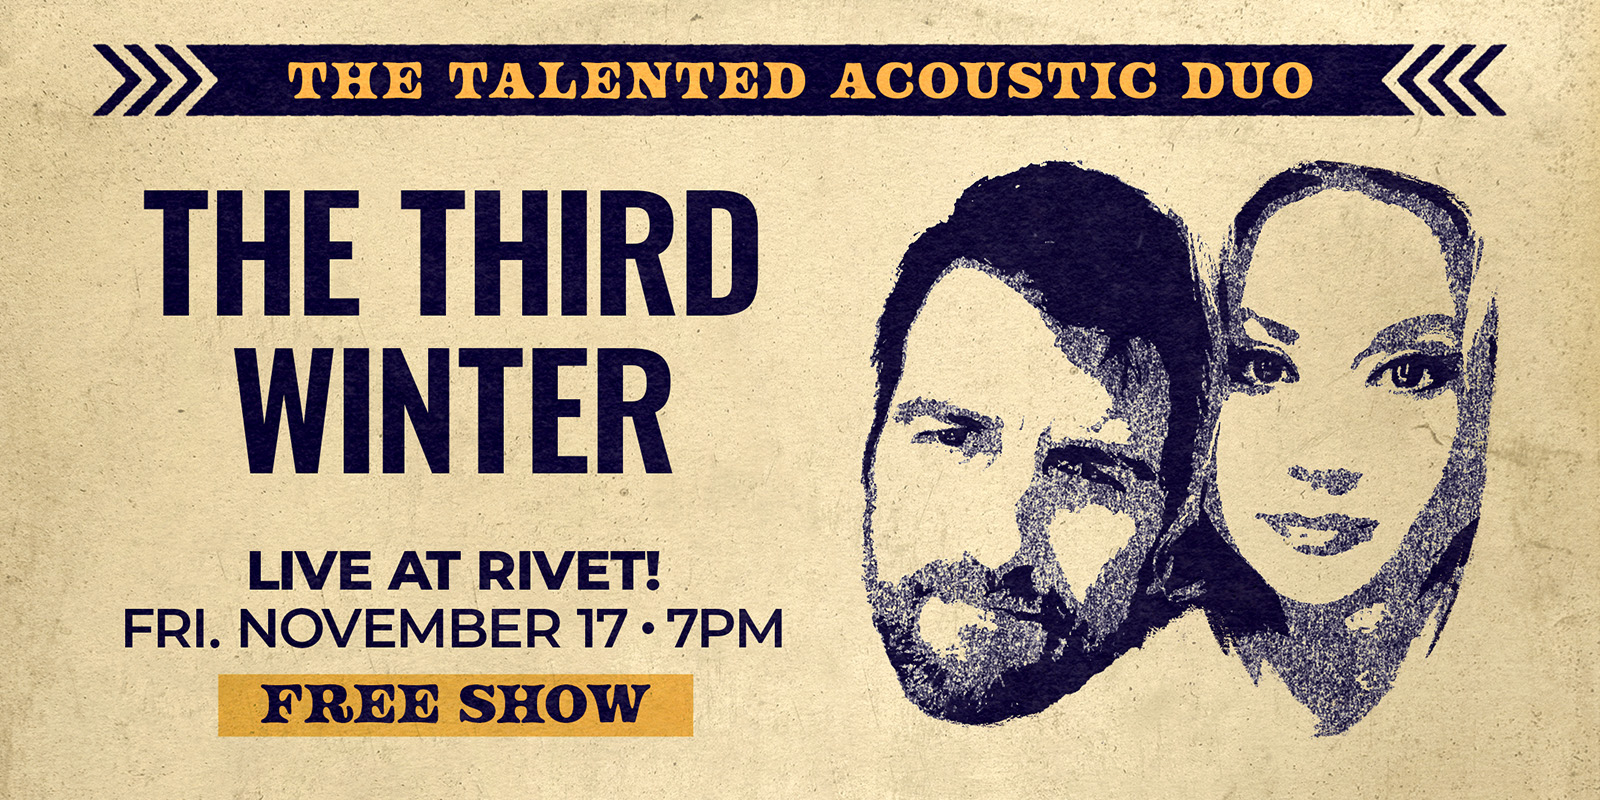 The talented acoustic duo "The Third Winter" will be performing live at Rivet: Canteen & Assembly on Friday, November 17th, starting at 7PM. The show is free to attend!